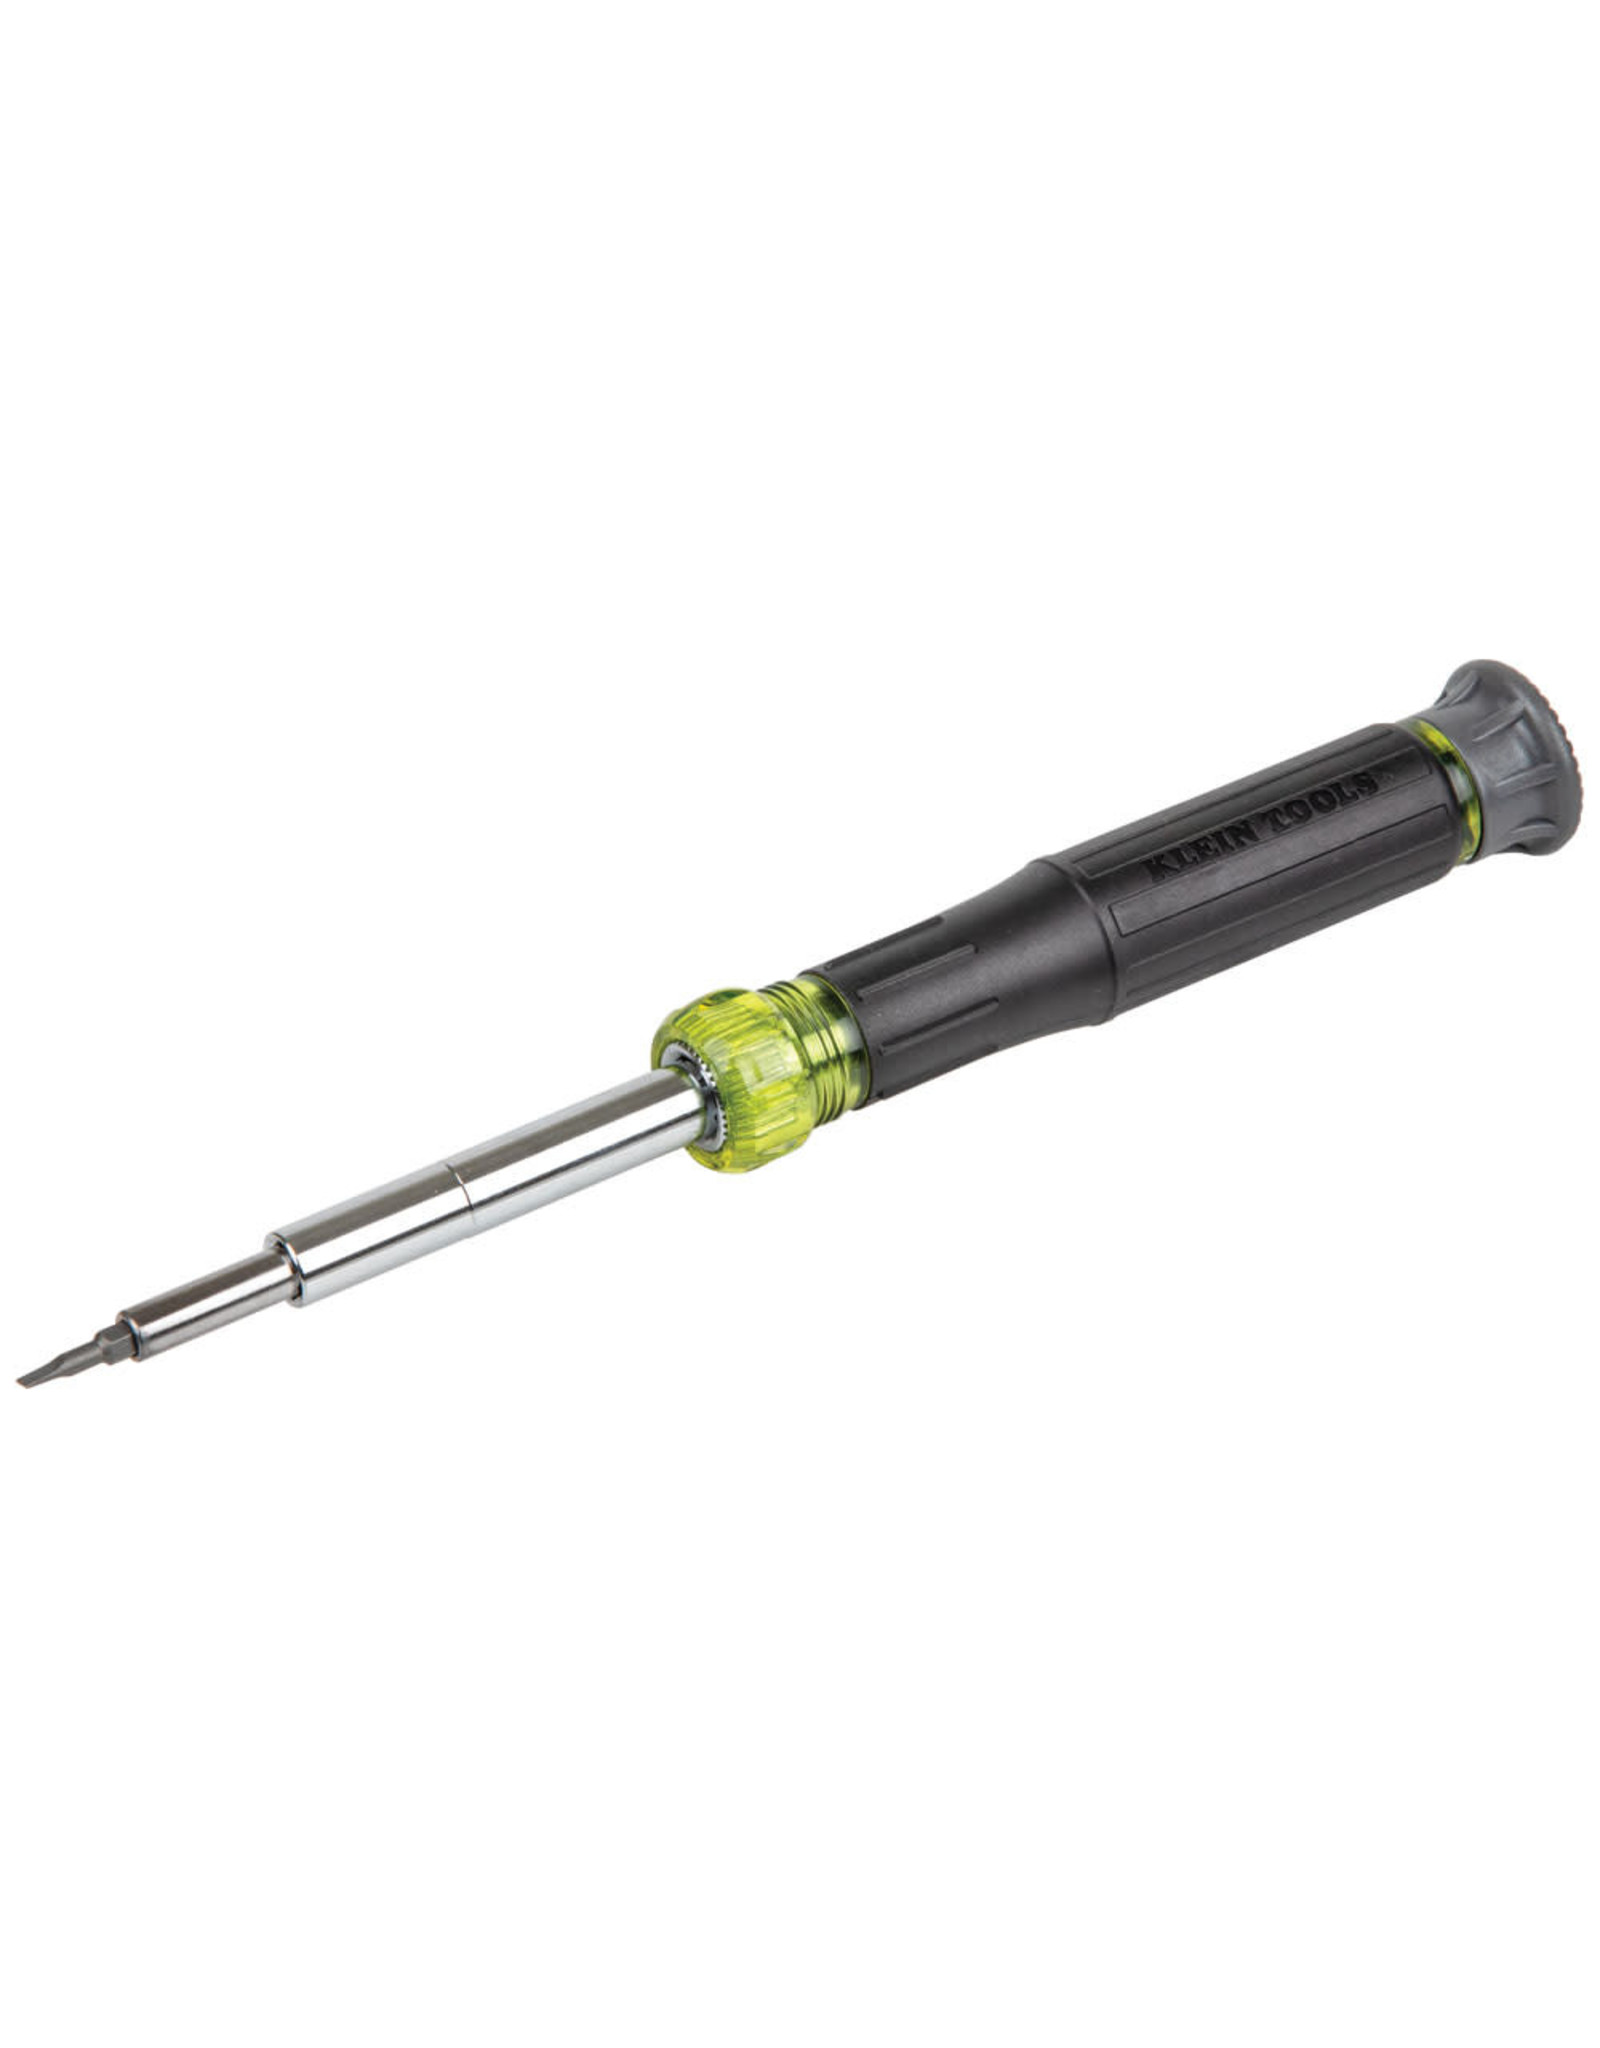 Klein Tools 14-in-1 Precision Screwdriver/ Nut Driver